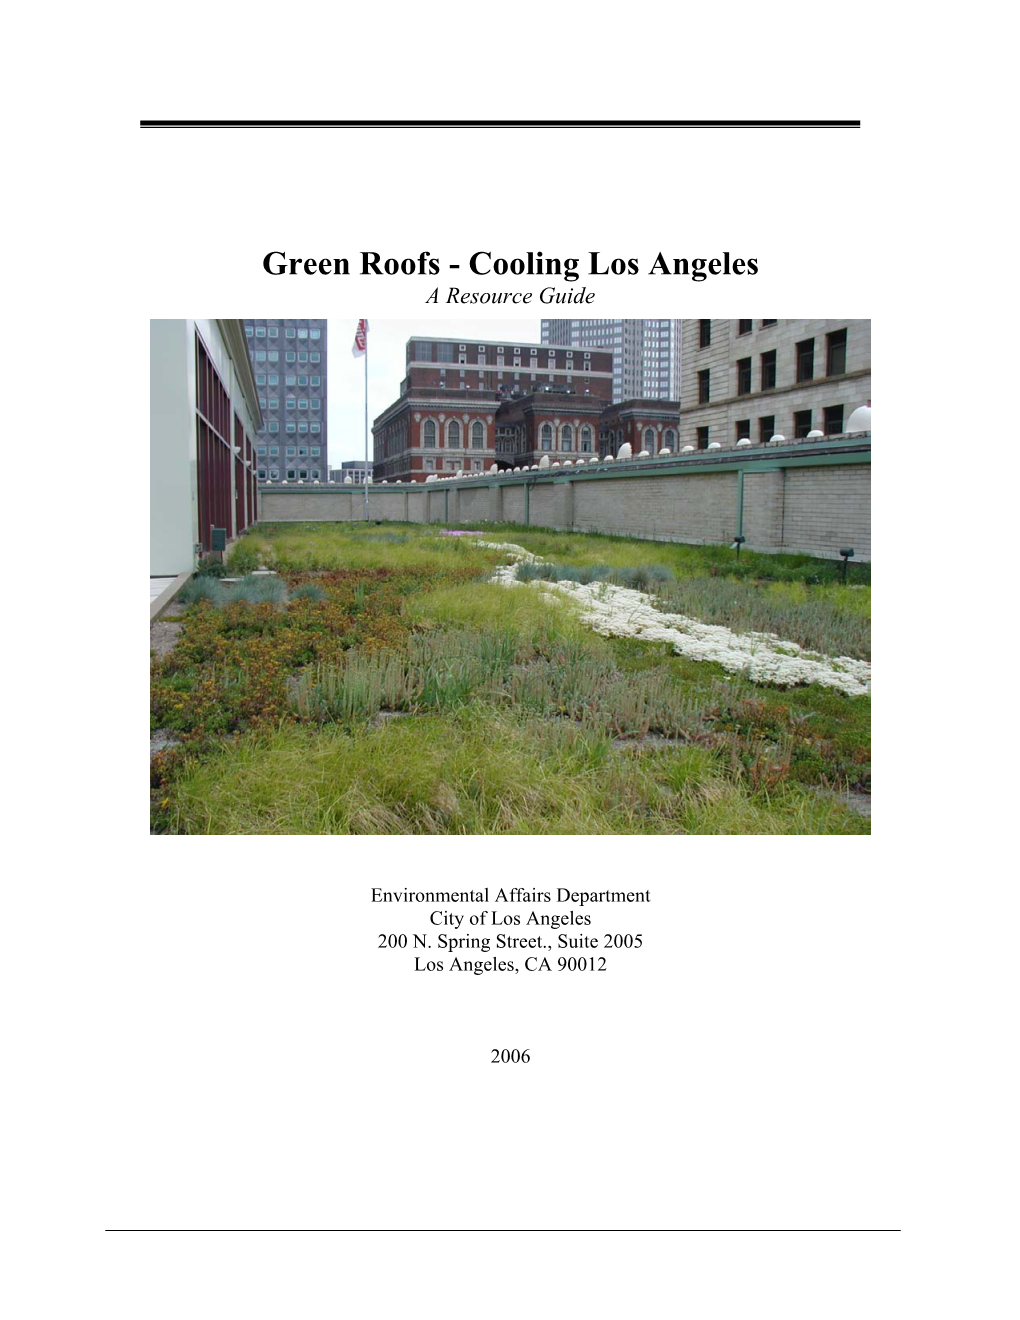 Green Roofs - Cooling Los Angeles a Resource Guide